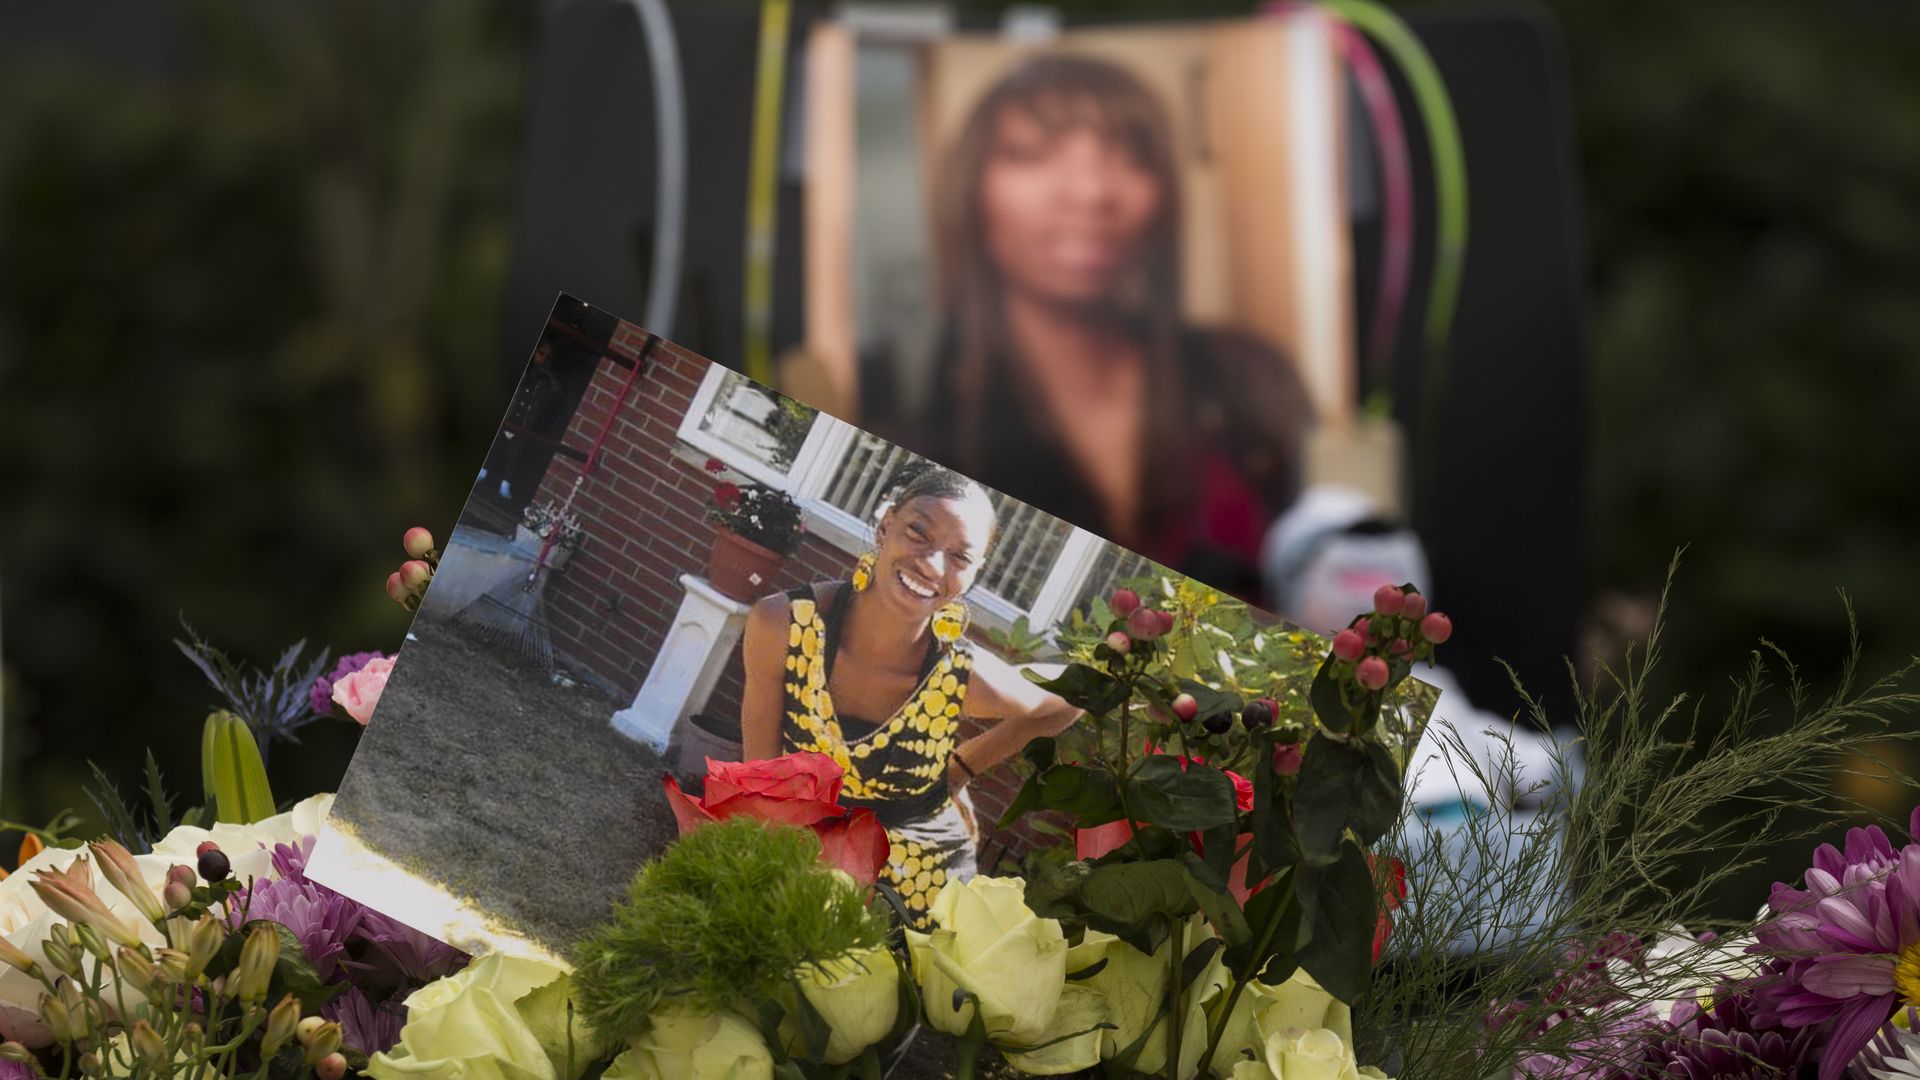 A memorial shrine with flowers, photos, and other items were placed outside the apartment where Charleena Lyles was killed by Seattle police officers in June 2017. 